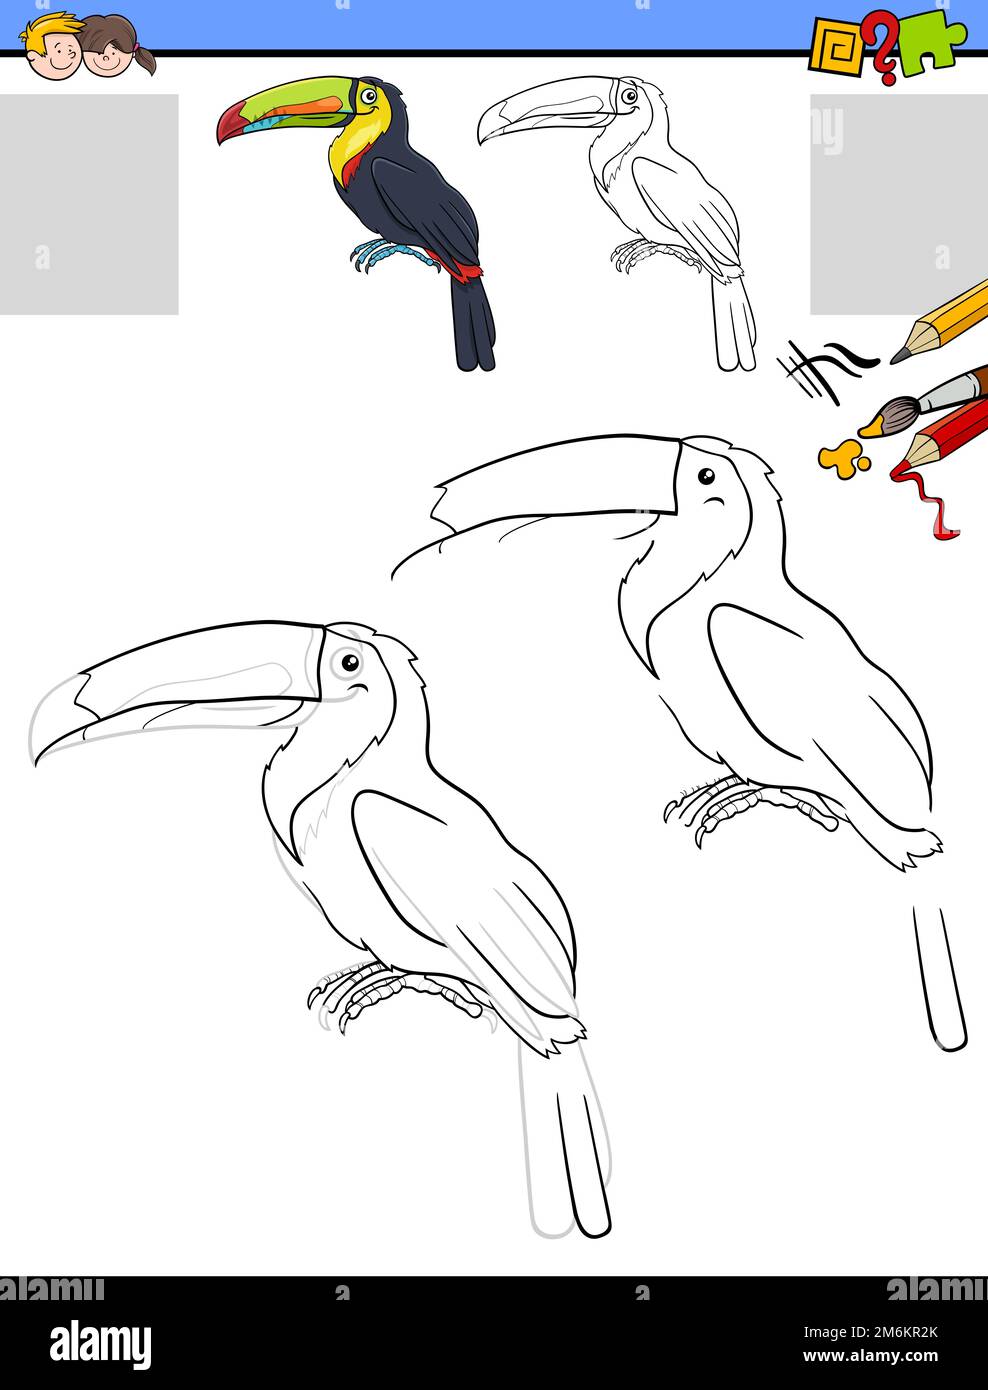 Drawing and coloring task with toucan bird animal character Stock Photo